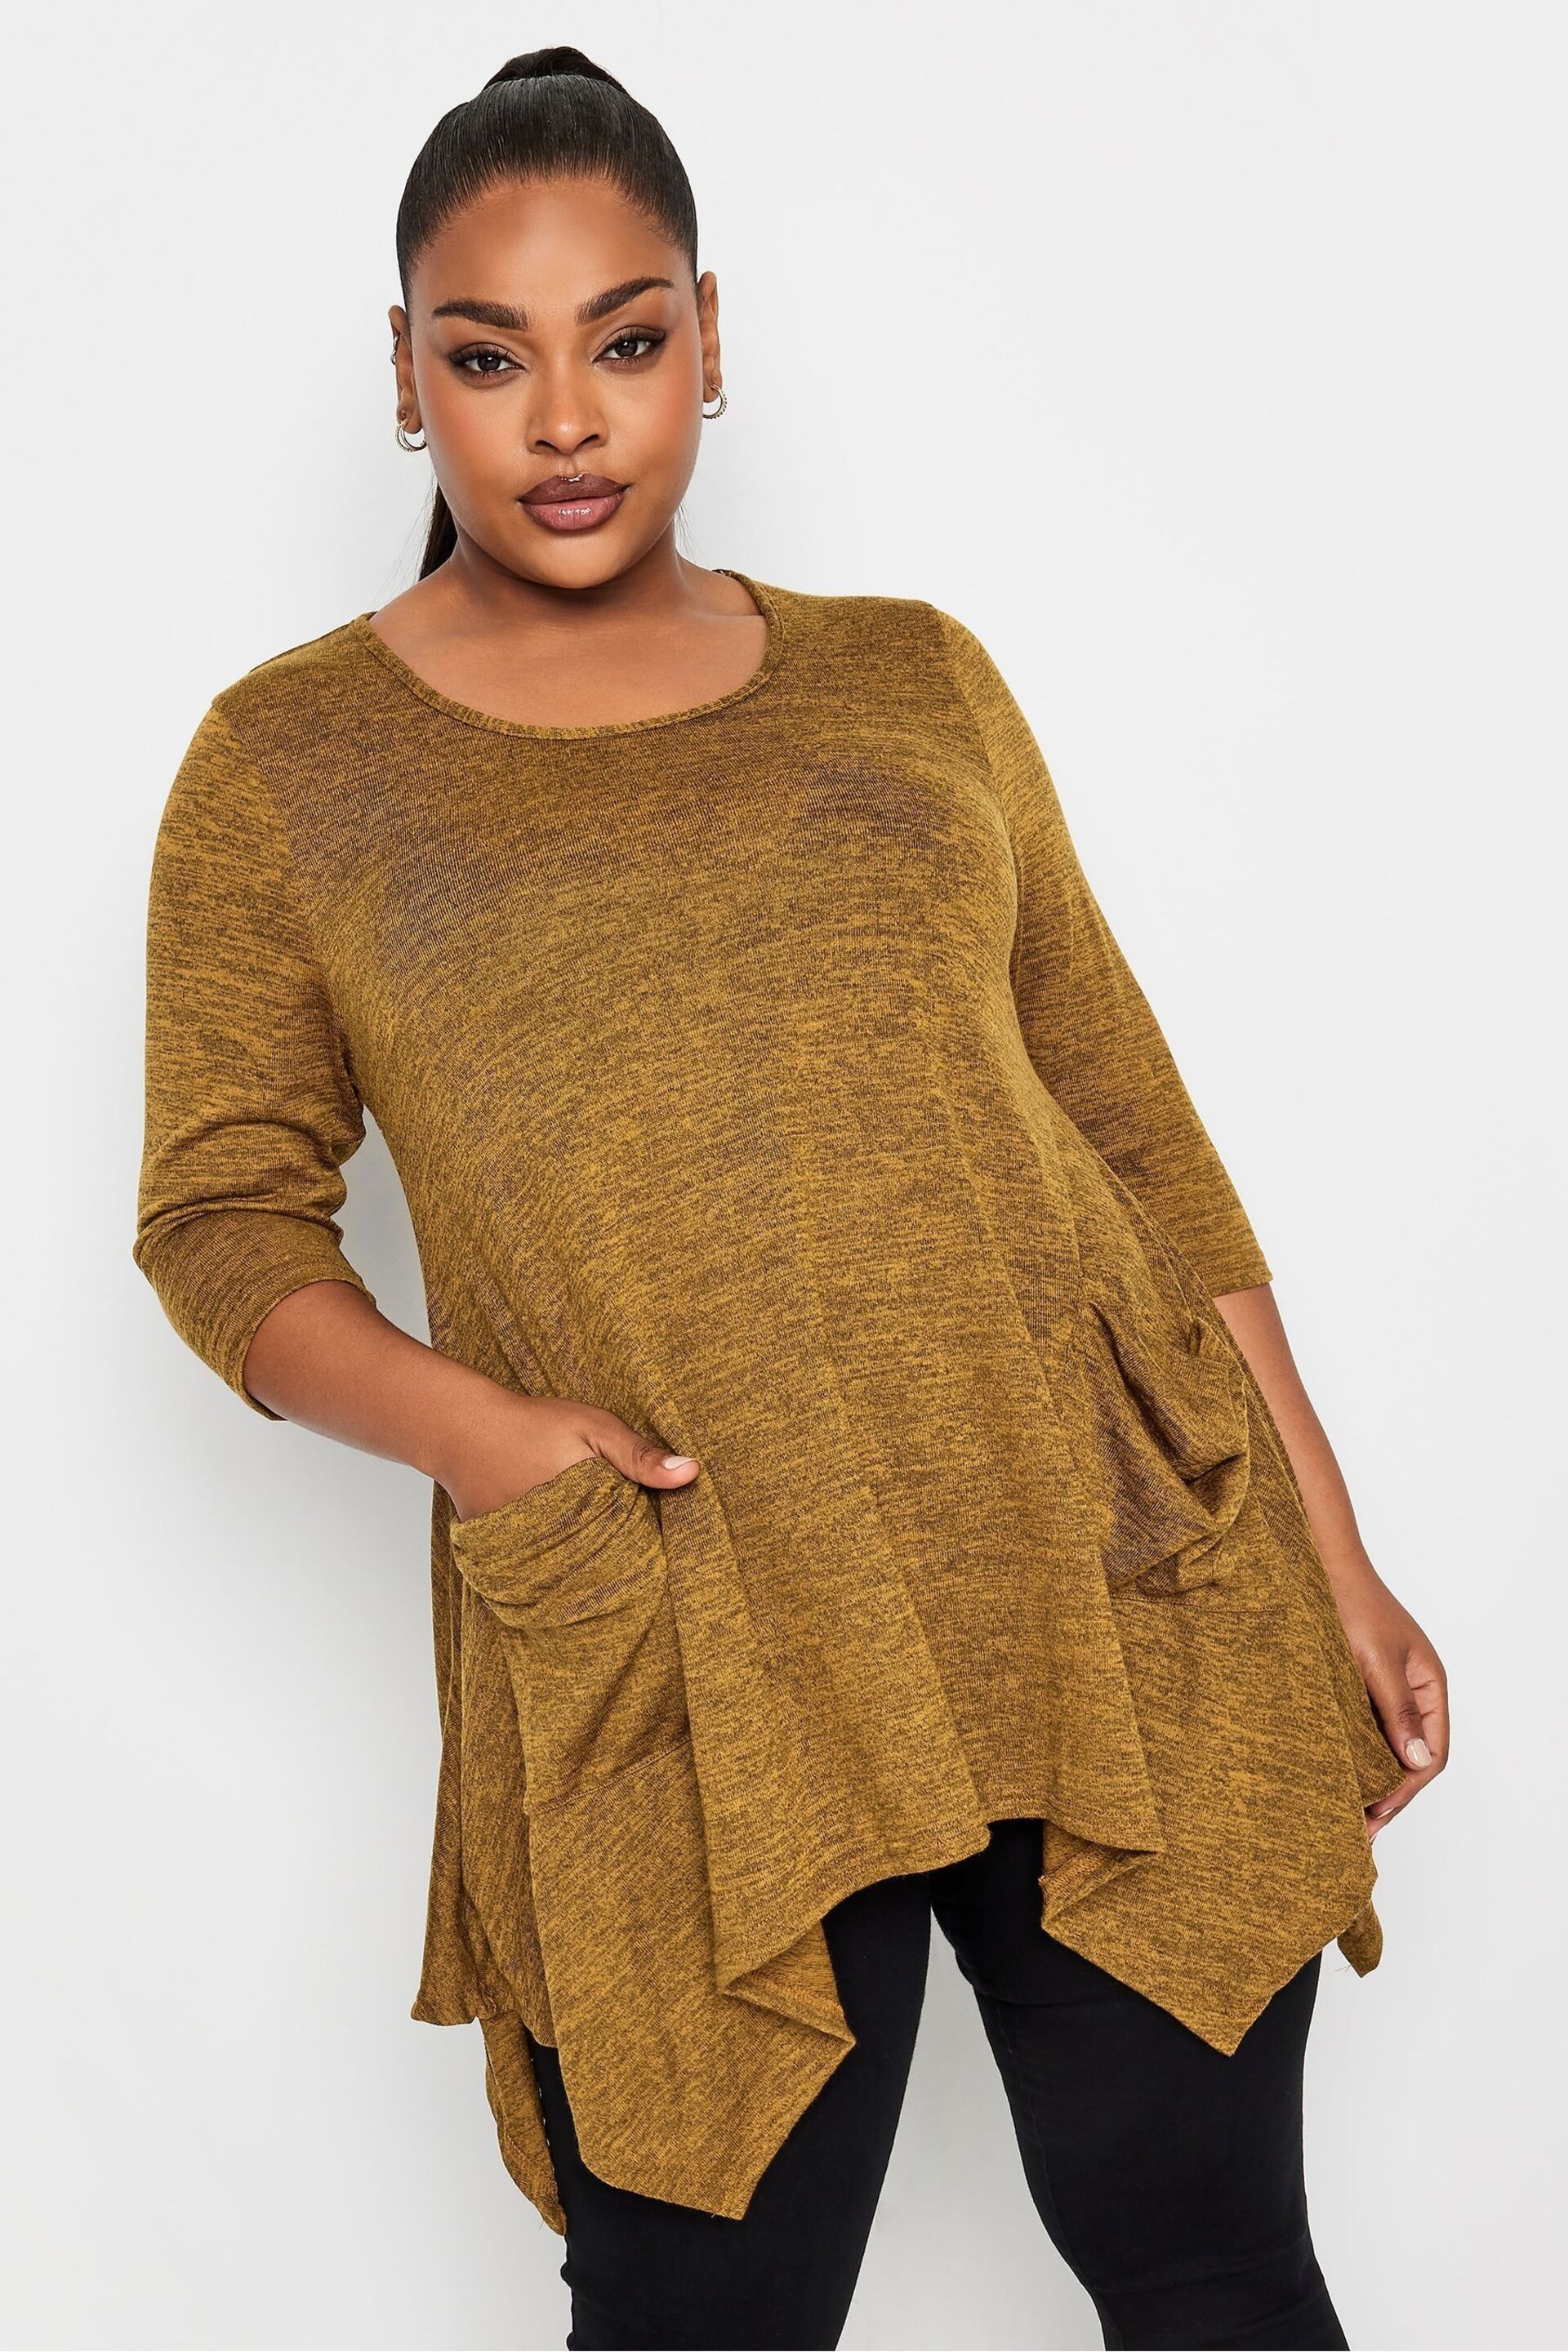 Yours Curve Brown Knitted Pocket Top - Image 1 of 4